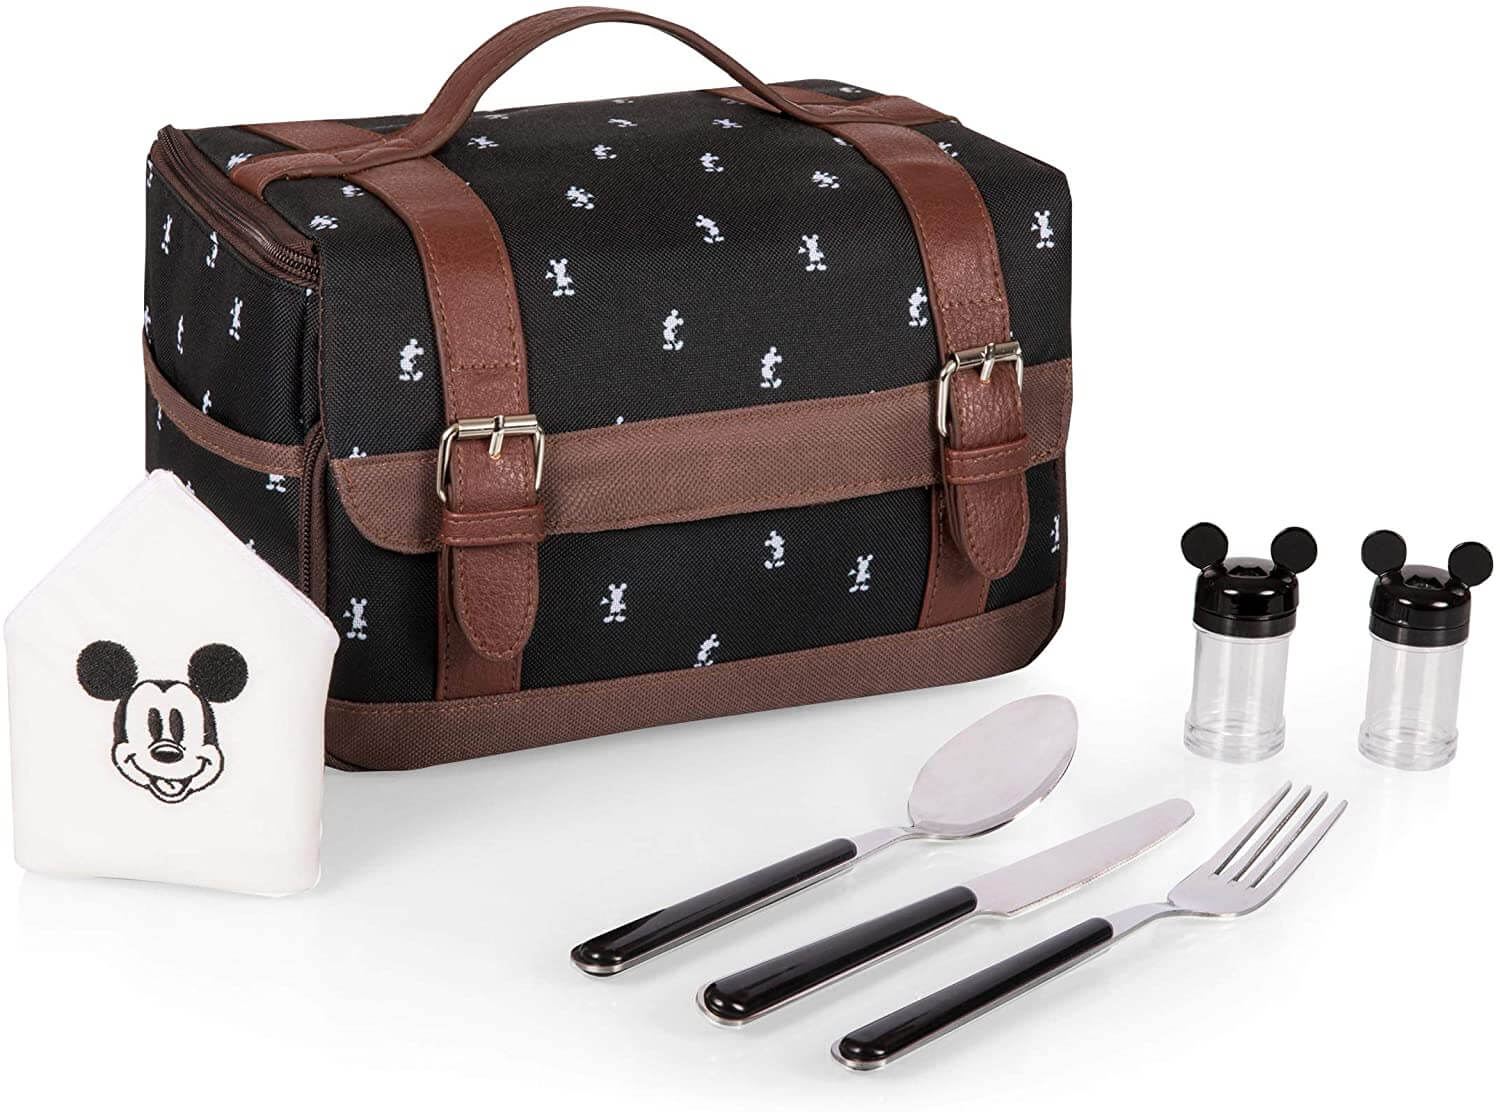 https://www.eventotb.com/wp-content/uploads/2020/11/disney-classics-mickey-mouse-insulated-lunch-cooler.jpg